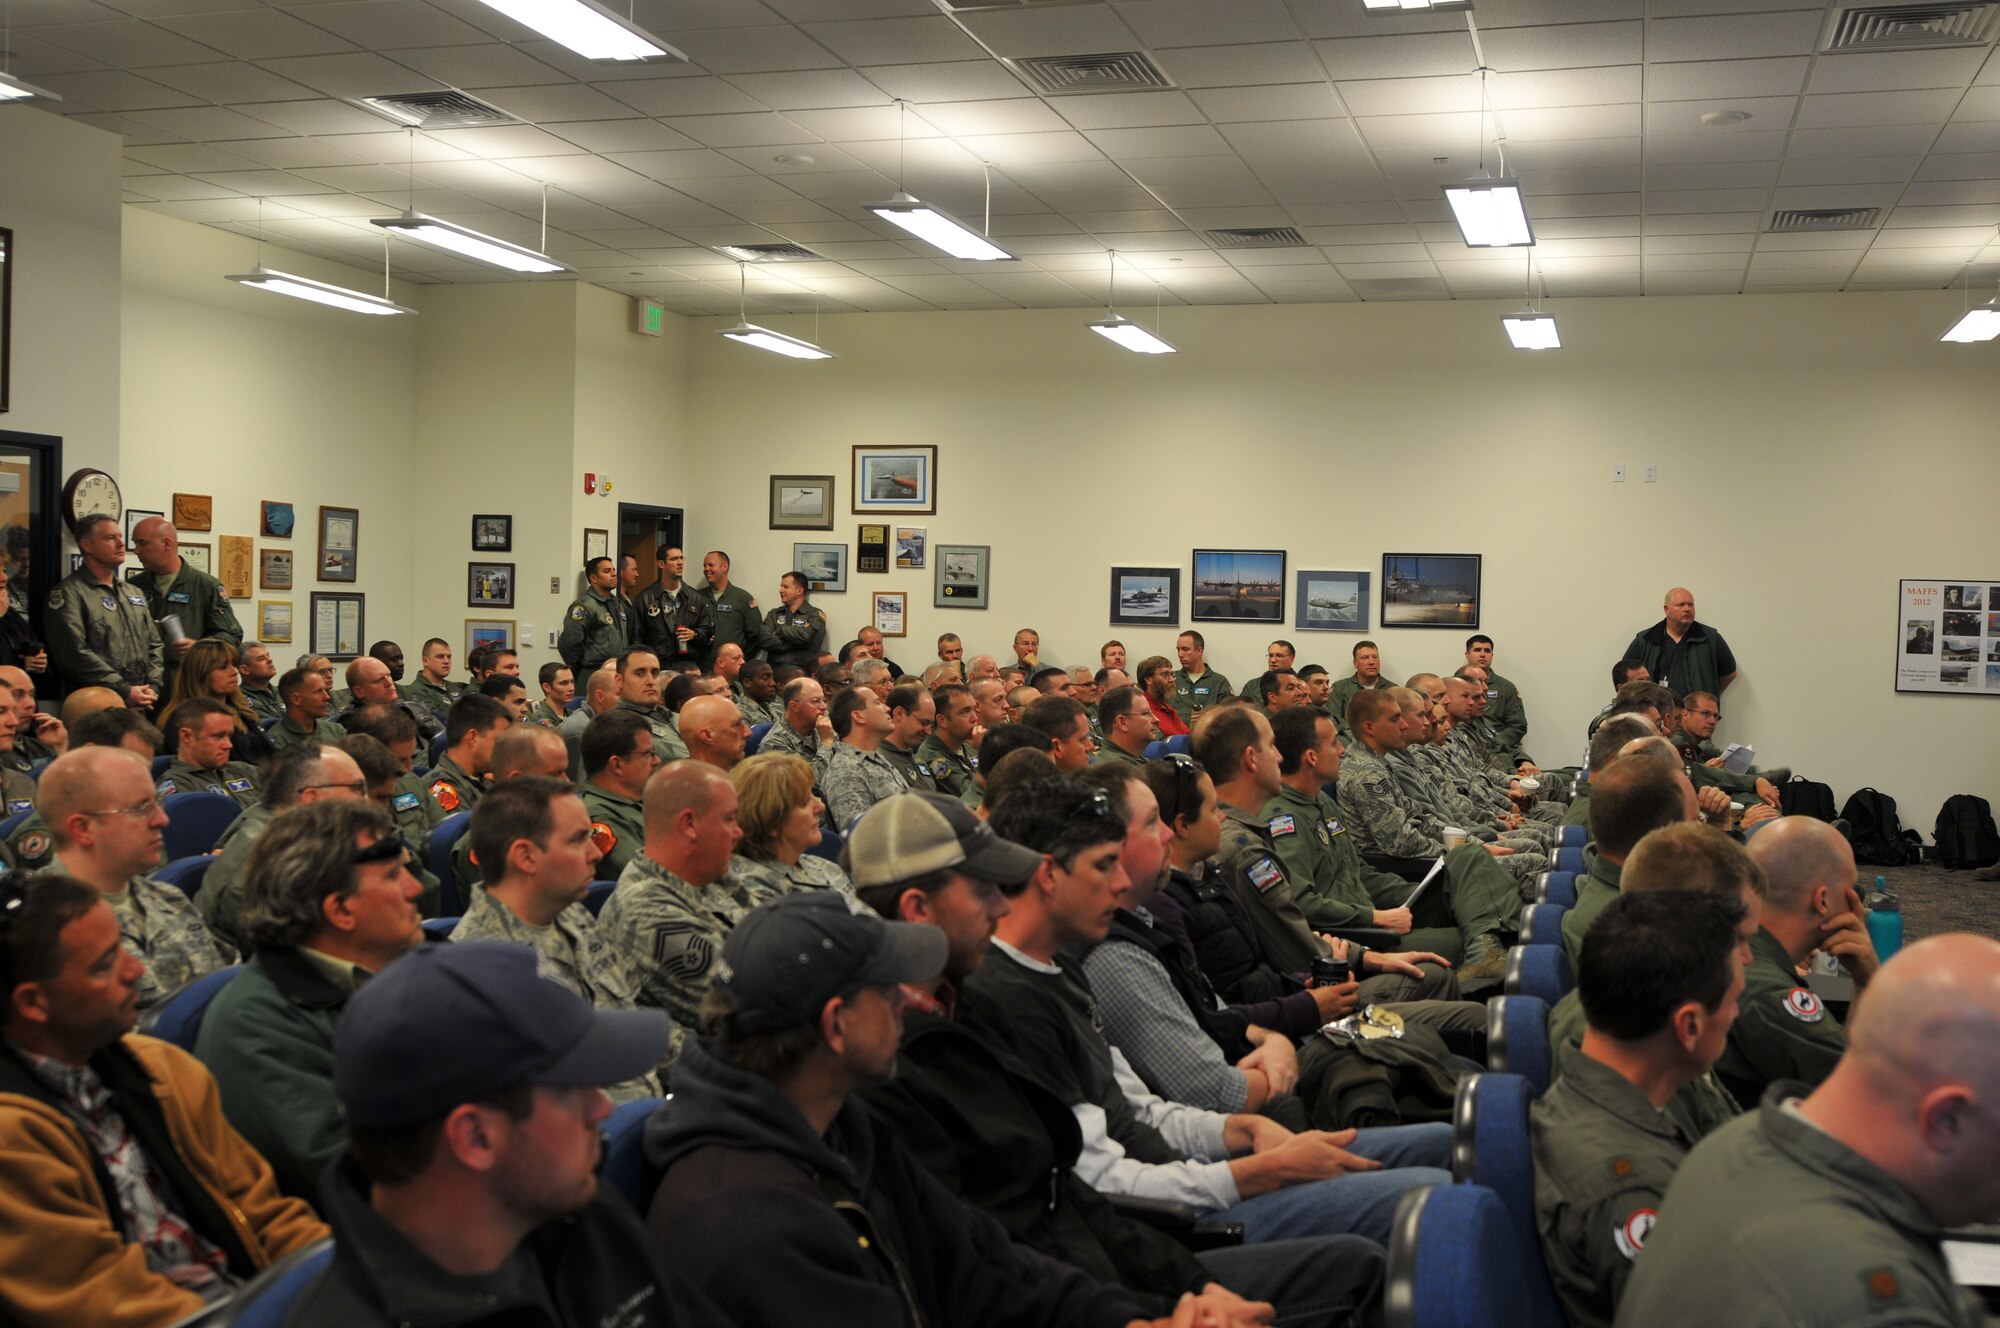 U.S. Air Force Col. Steve Rader, commander of the 153rd Airlift Wing, Wyoming Air National Guard, welcomes members from the 145th Airlift Wing, North Carolina Air National Guard and representatives from 302nd Airlift Wing and 146th Airlift Wing at the beginning of the annual Modular Airborne Fire Fighting System training for certification held at the Cheyenne Regional Airport, Cheyenne, Wyo., May 6, 2013. (U.S. Air National Guard photo by Tech. Sgt. Patricia Findley/Released)